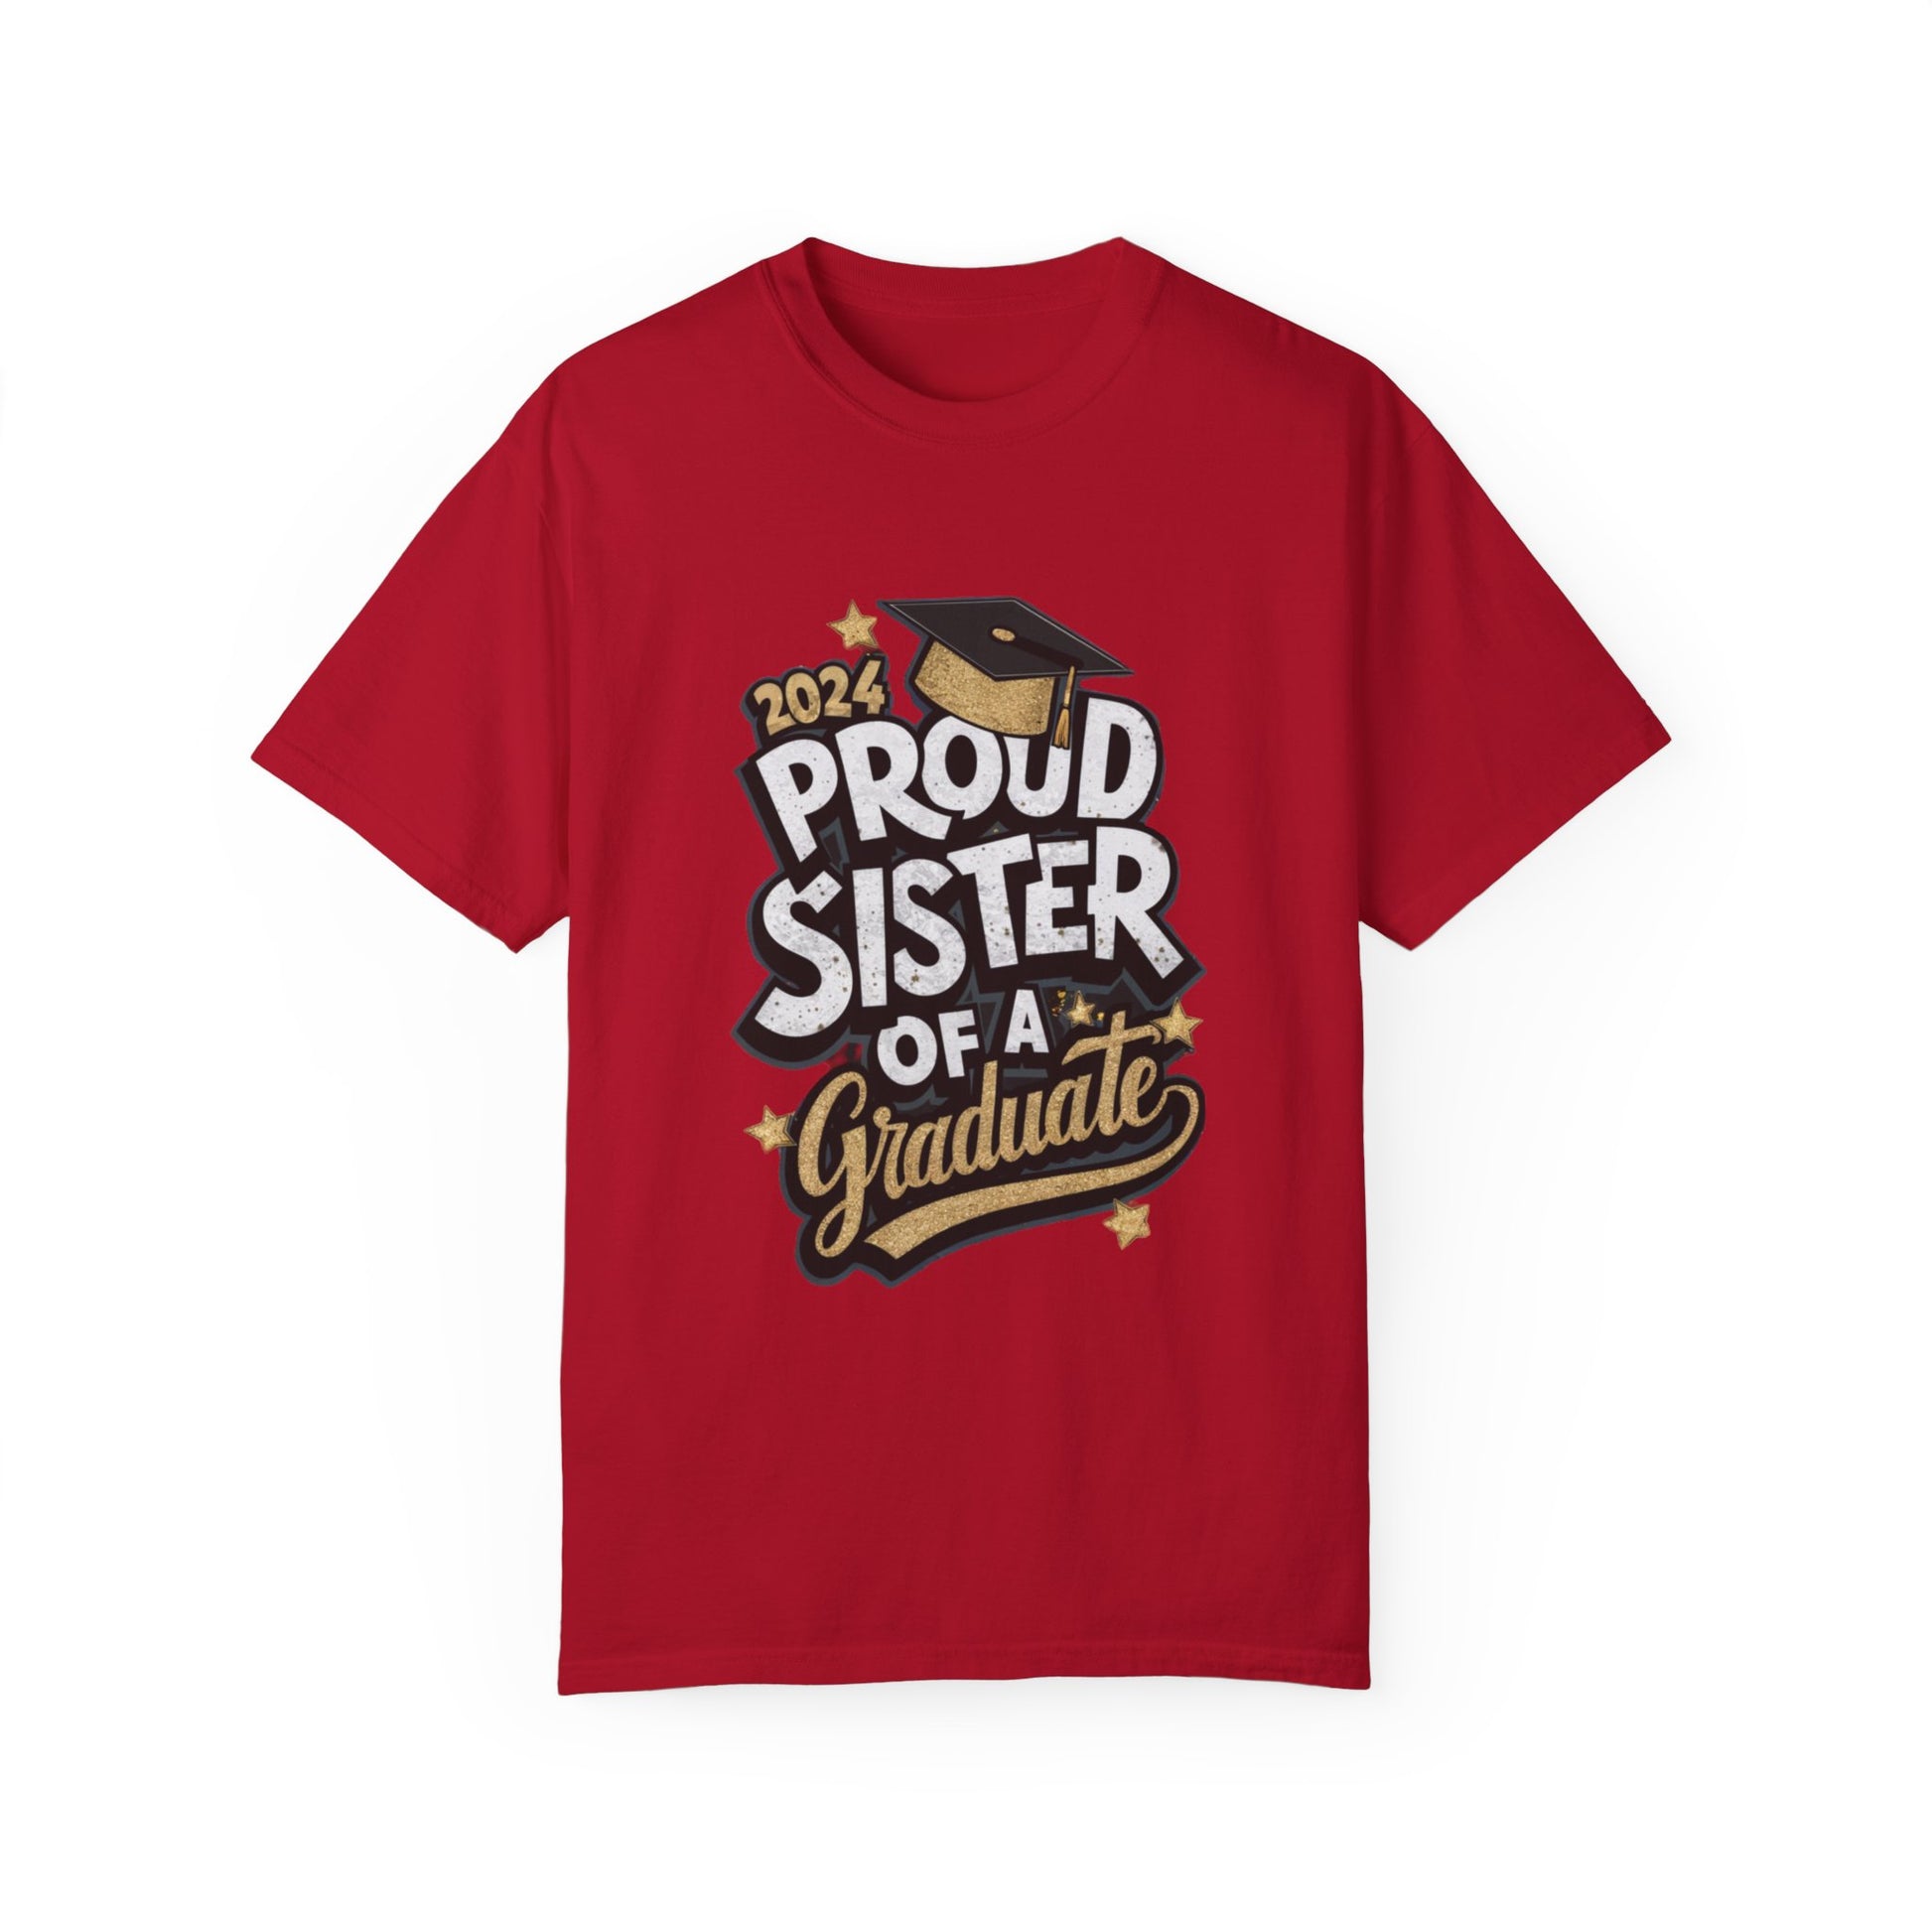 Proud Sister of a 2024 Graduate Unisex Garment-dyed T-shirt Cotton Funny Humorous Graphic Soft Premium Unisex Men Women Red T-shirt Birthday Gift-2